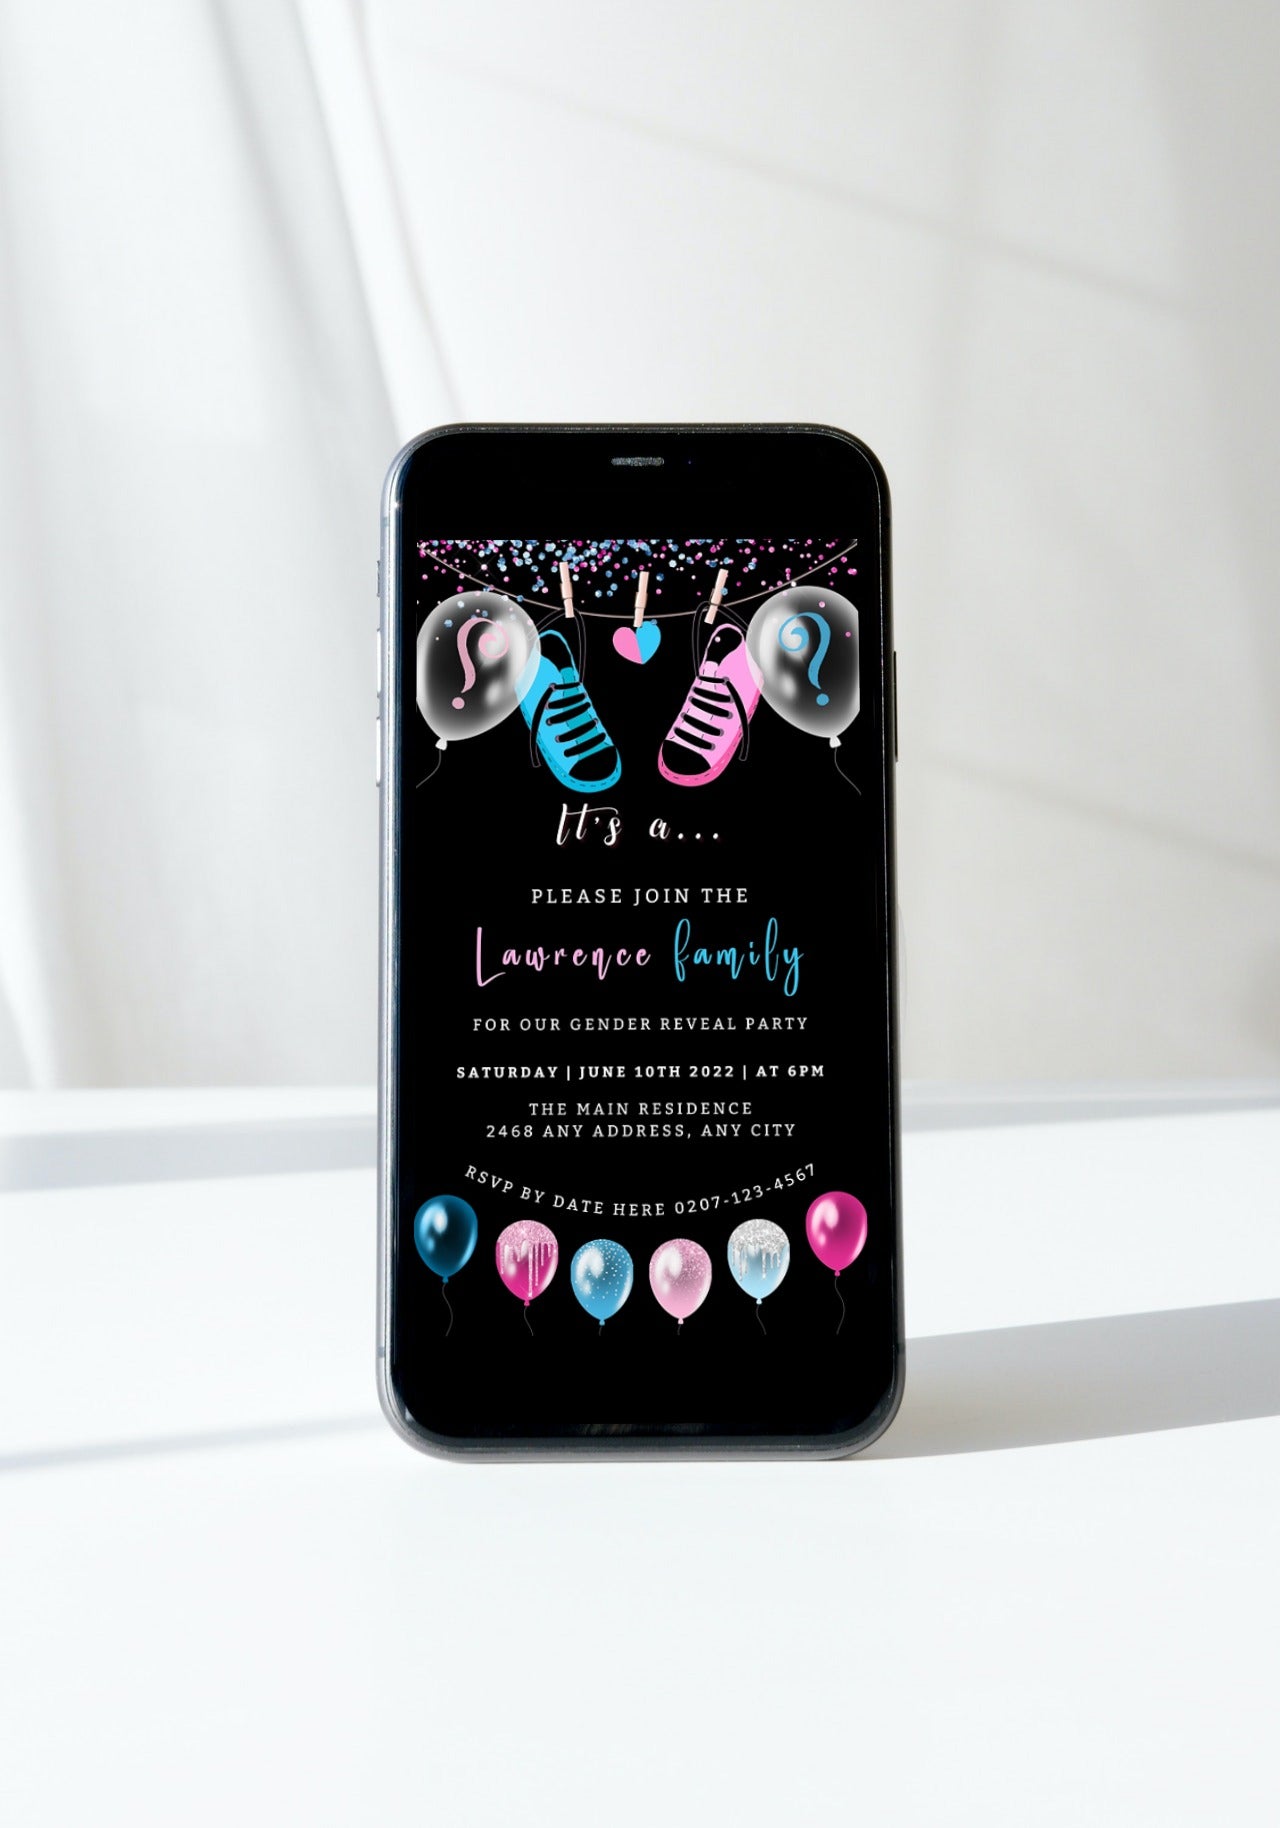 Smartphone displaying customizable baby shower invitation with blue and pink balloons, designed for gender reveal events. Eco-friendly digital template by URCordiallyInvited.